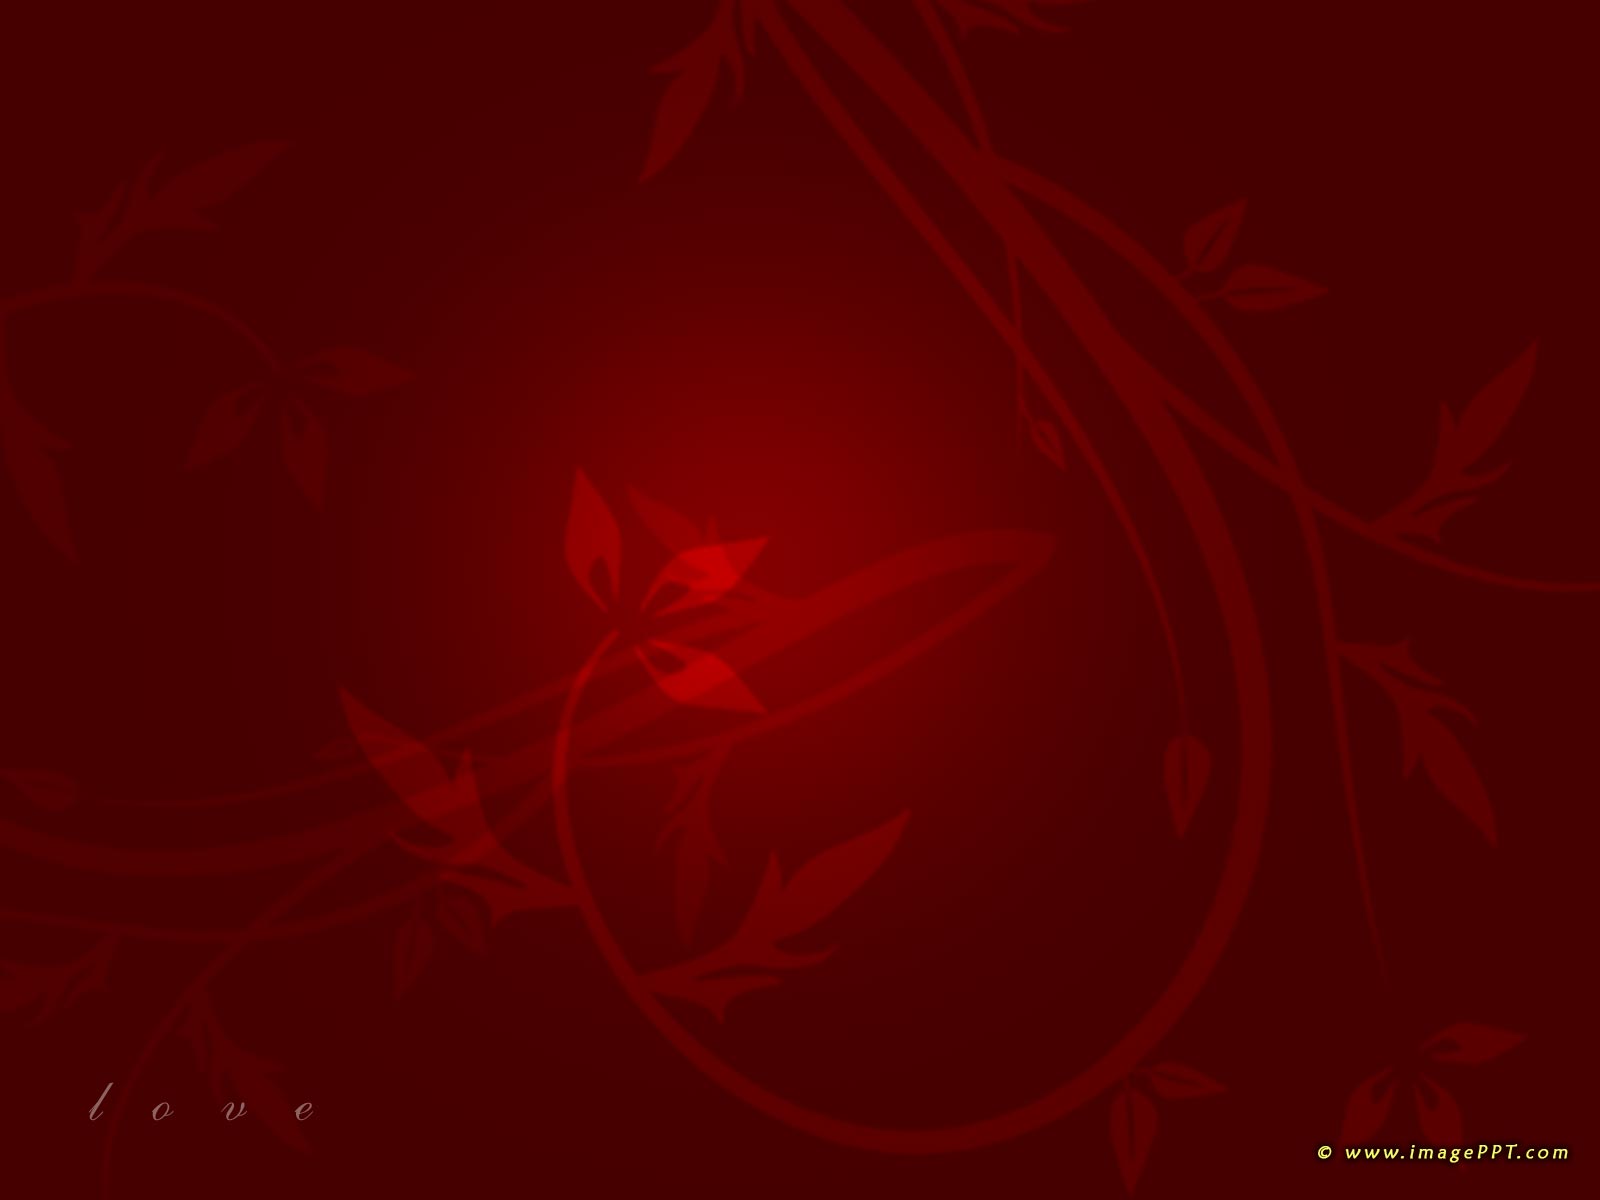 Red Textile Design With Black Background HD Red Aesthetic Wallpapers | HD  Wallpapers | ID #56060